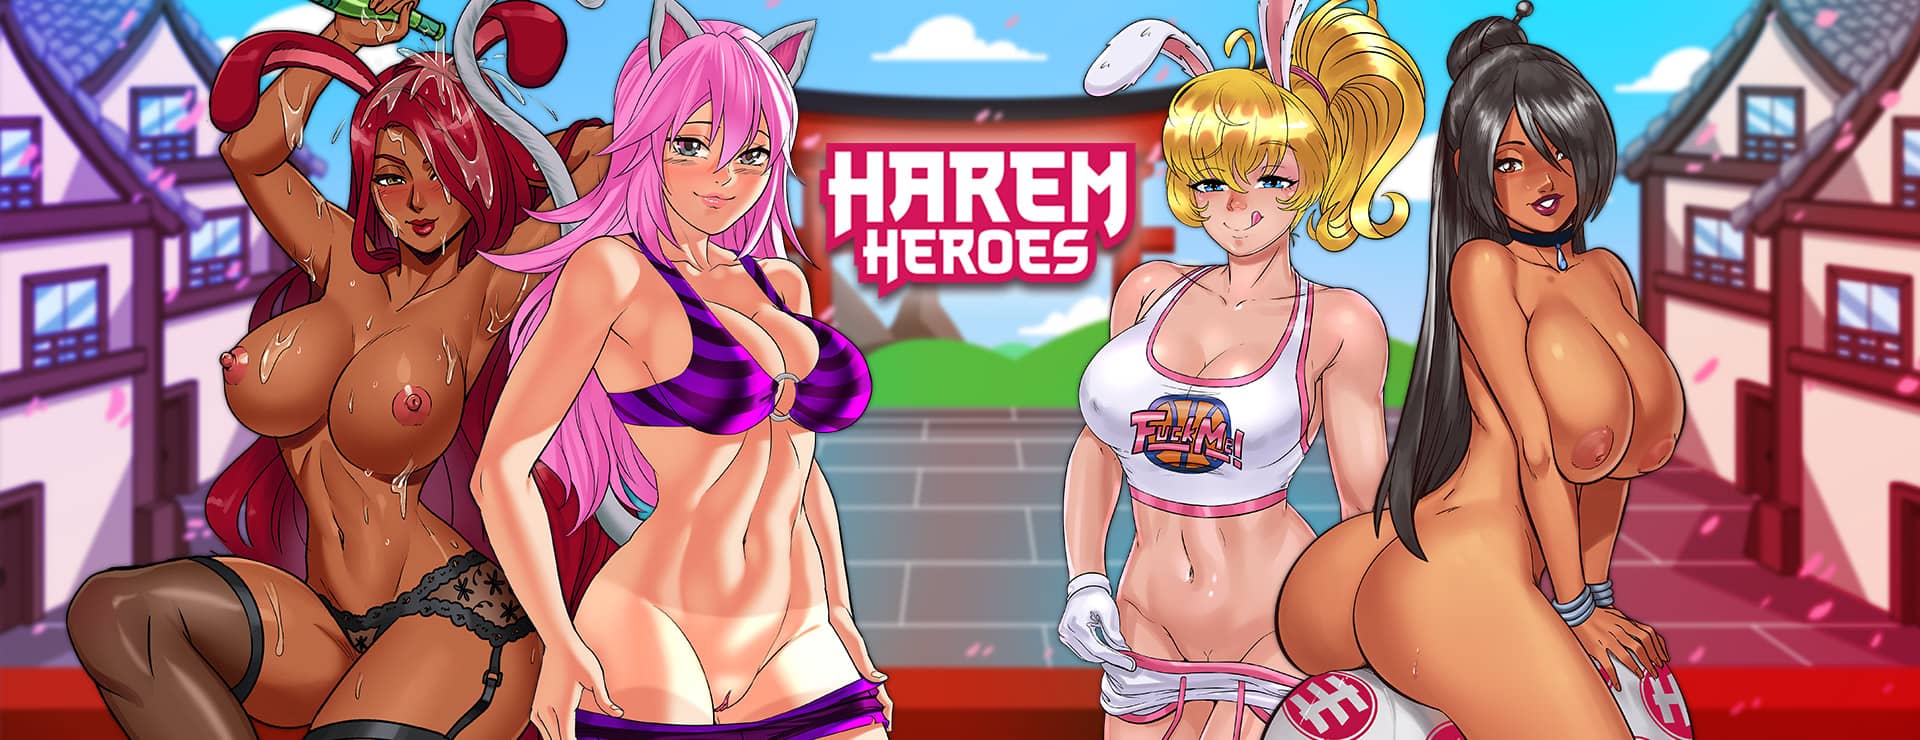 Harem Heroes - Action Adventure Game